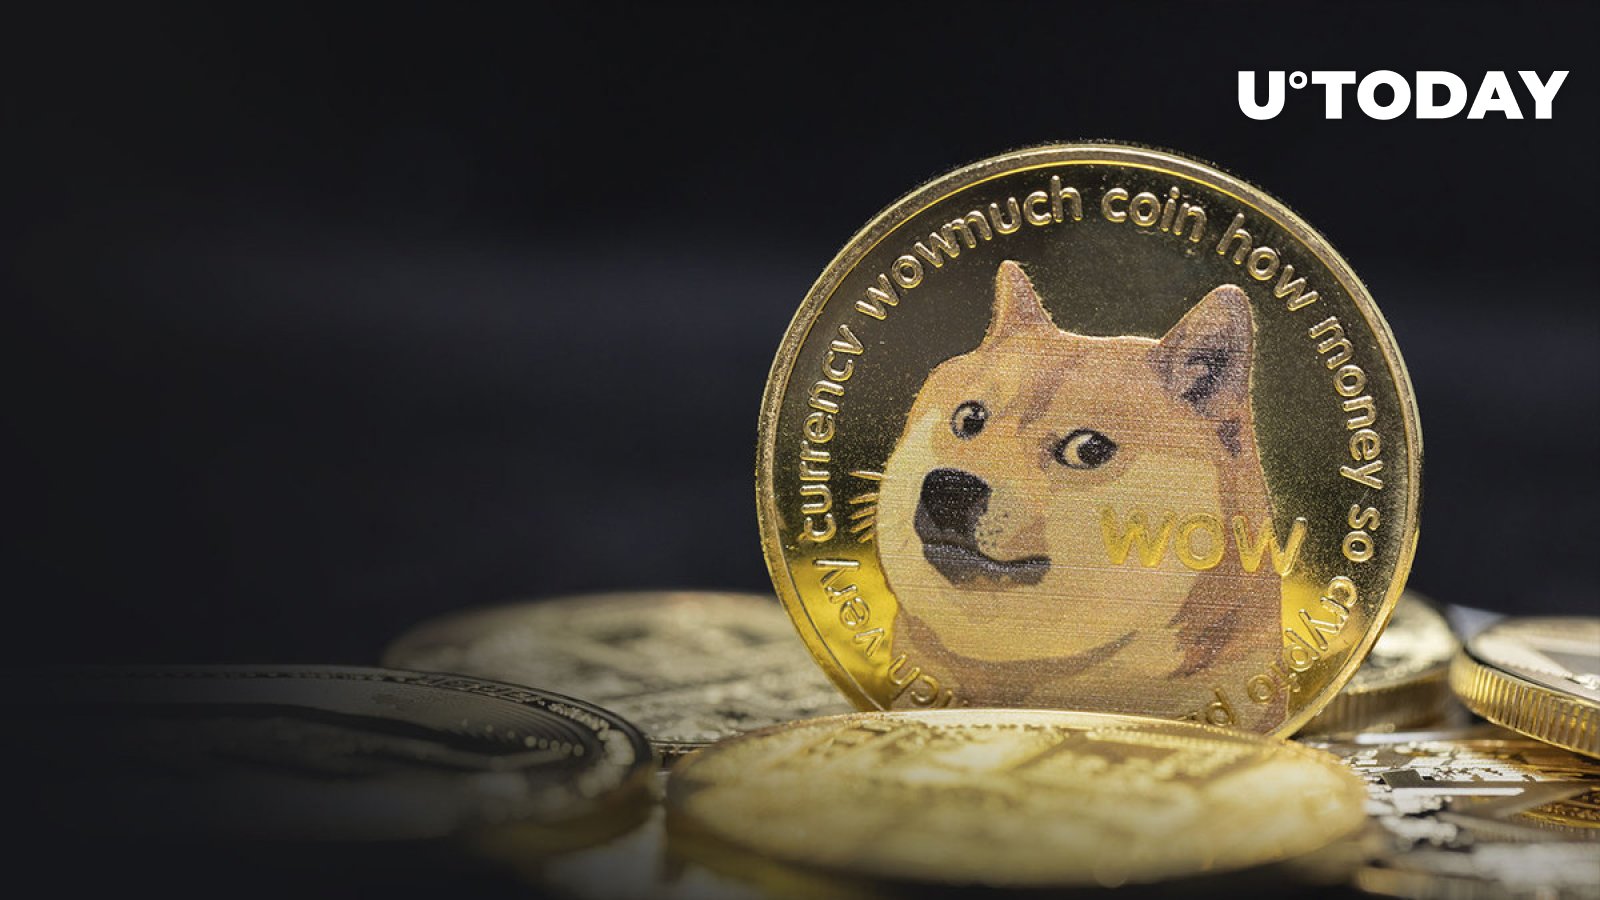 Dogecoin (DOGE) Community Debunks Claims of Vulnerability Putting Billions of Funds at Risk